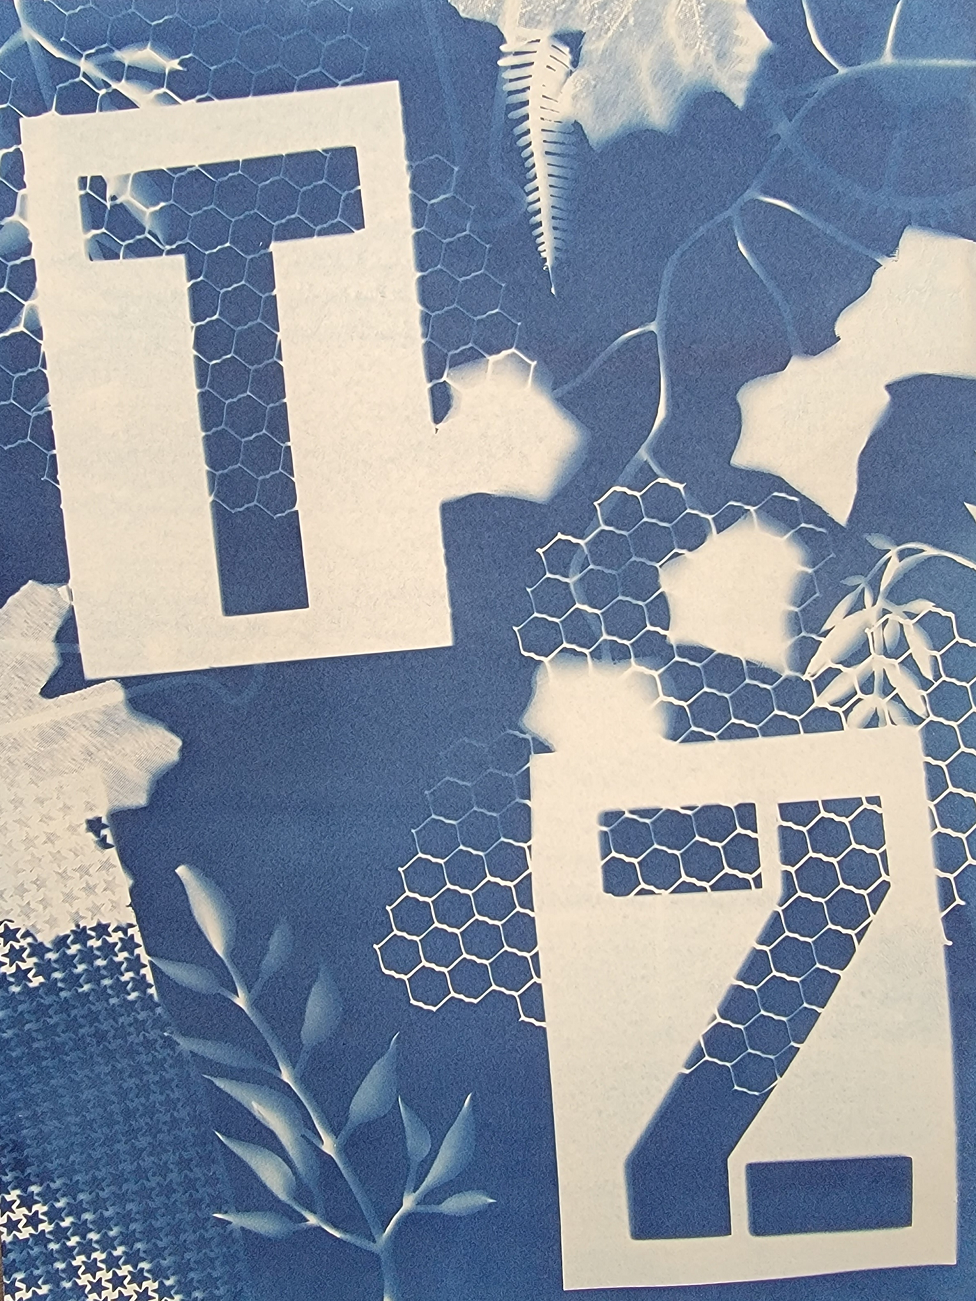 Cyanotype Photographic Prints inspired by Anna Atkins